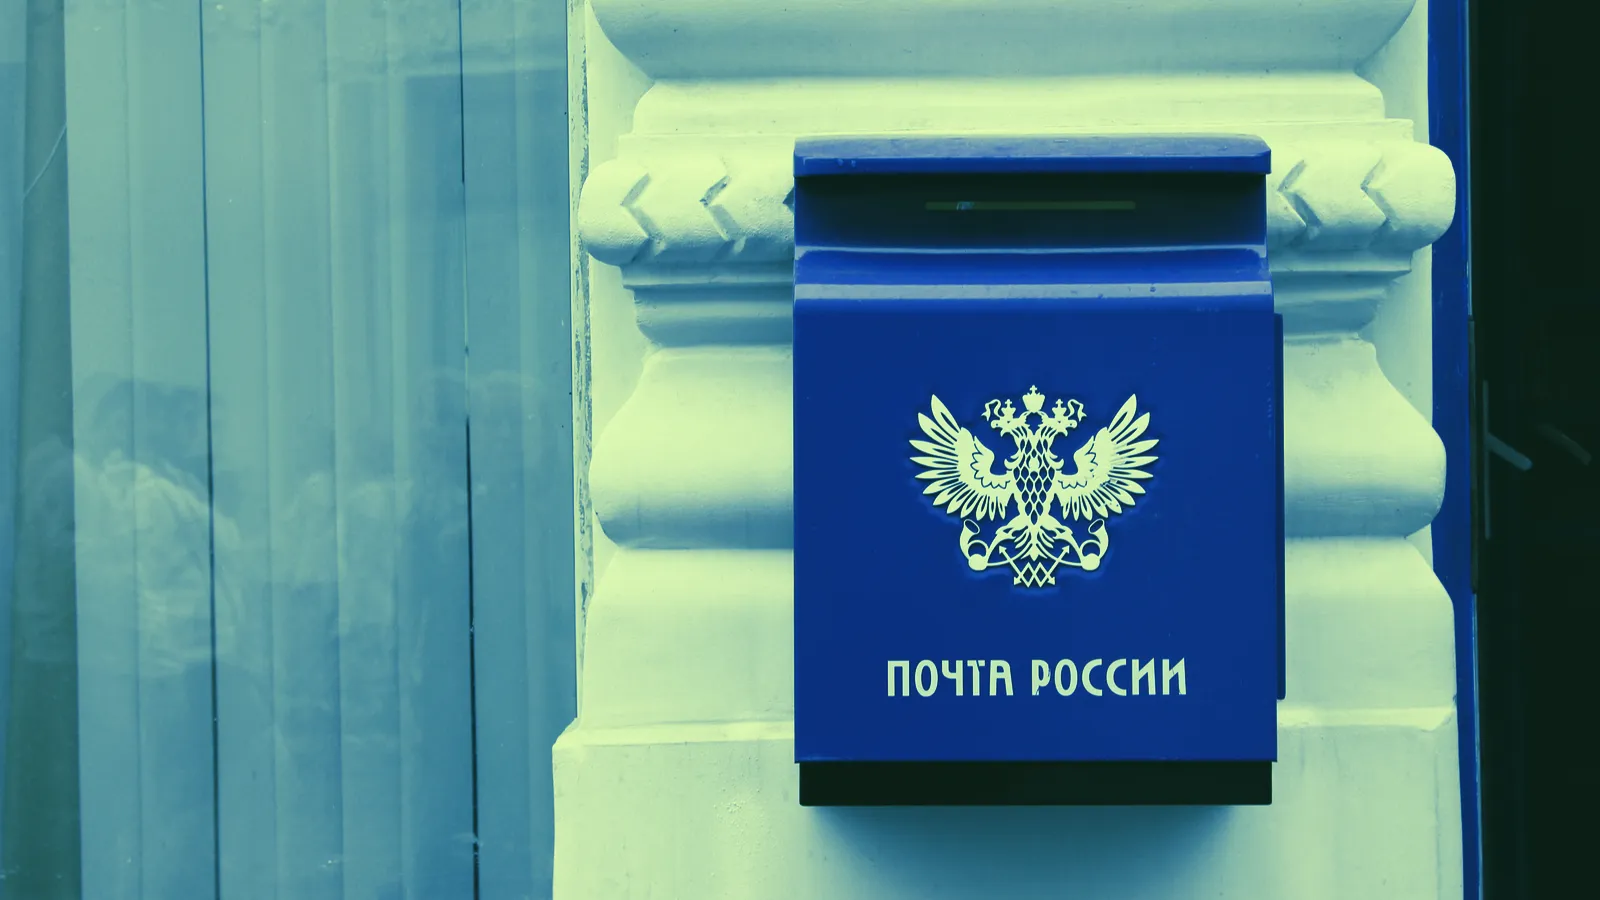 Russian police arrested the head of a post office for mining crypto and causing $427 worth of damages. Image: Shutterstock